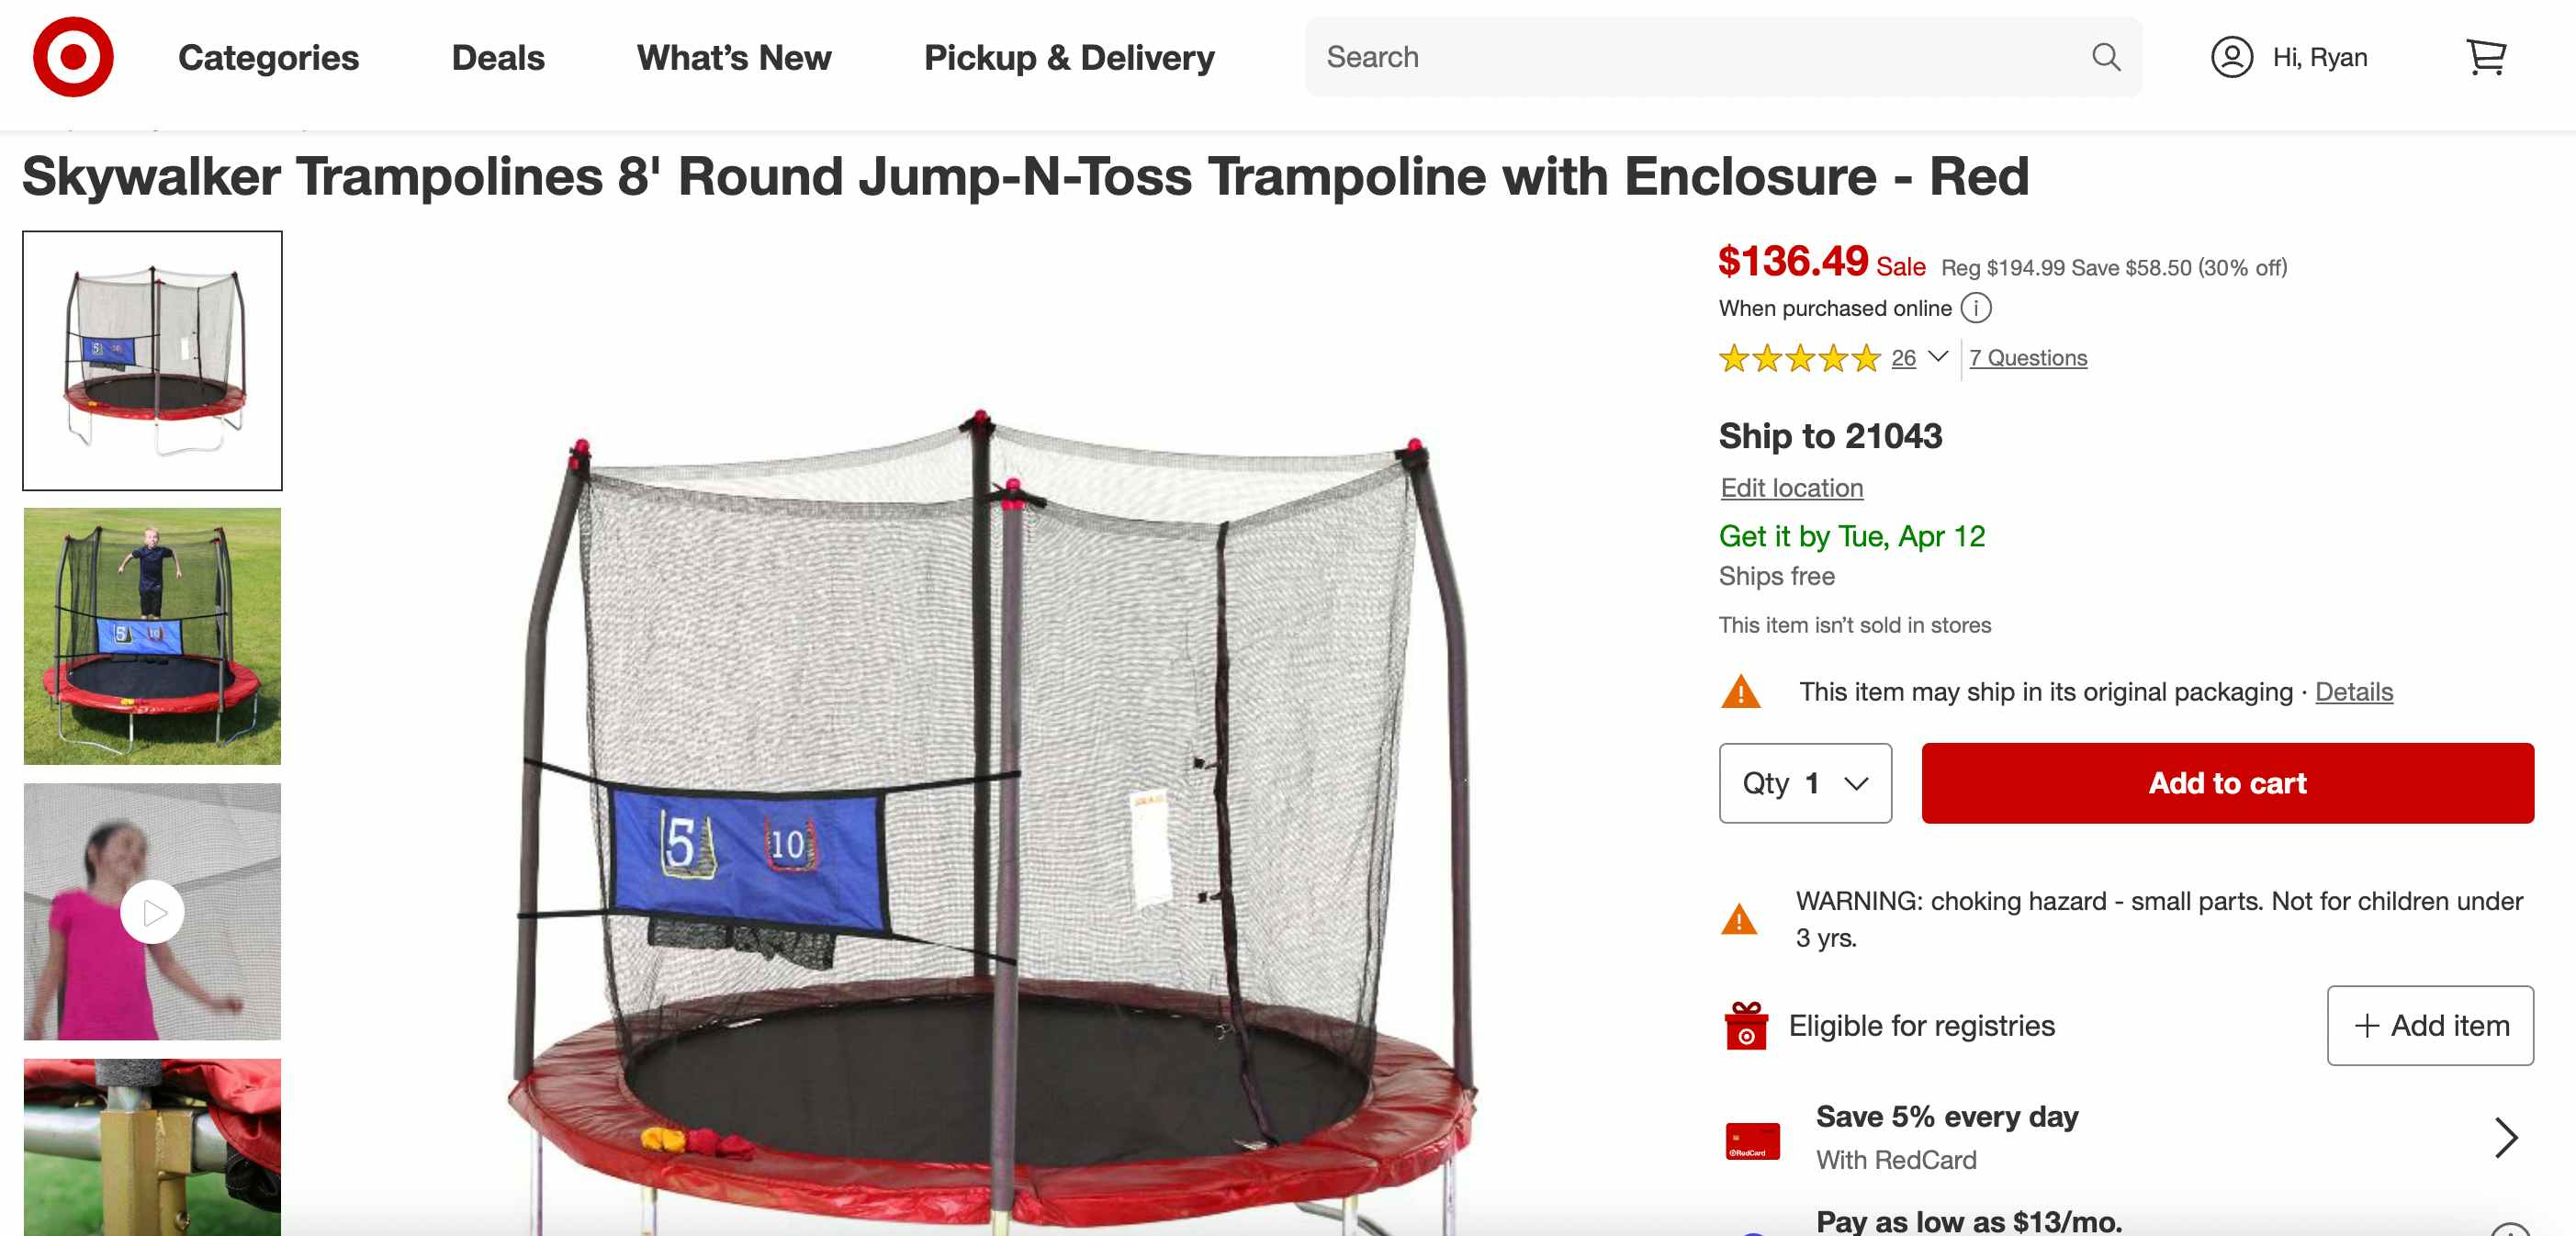 A screenshot of a Skywalker Trampoline product page on Target's website.